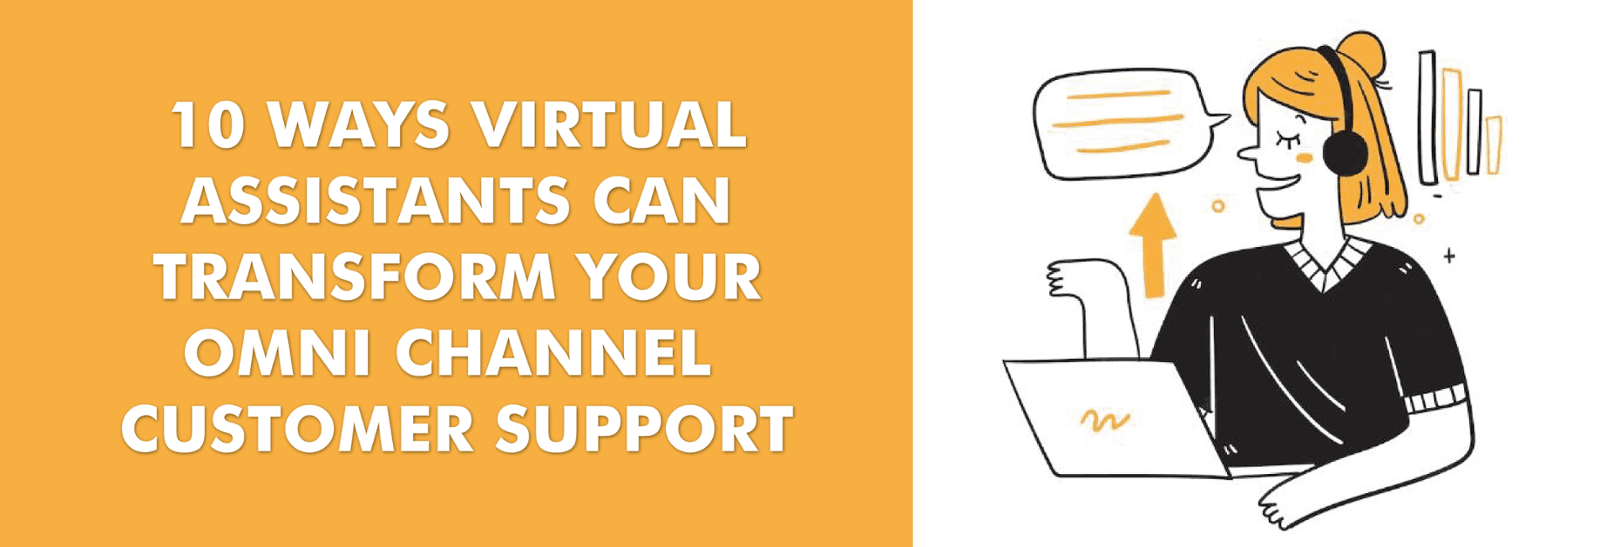 The Ultimate Guide to Utilising Virtual Assistants for Omni-Channel Customer Support